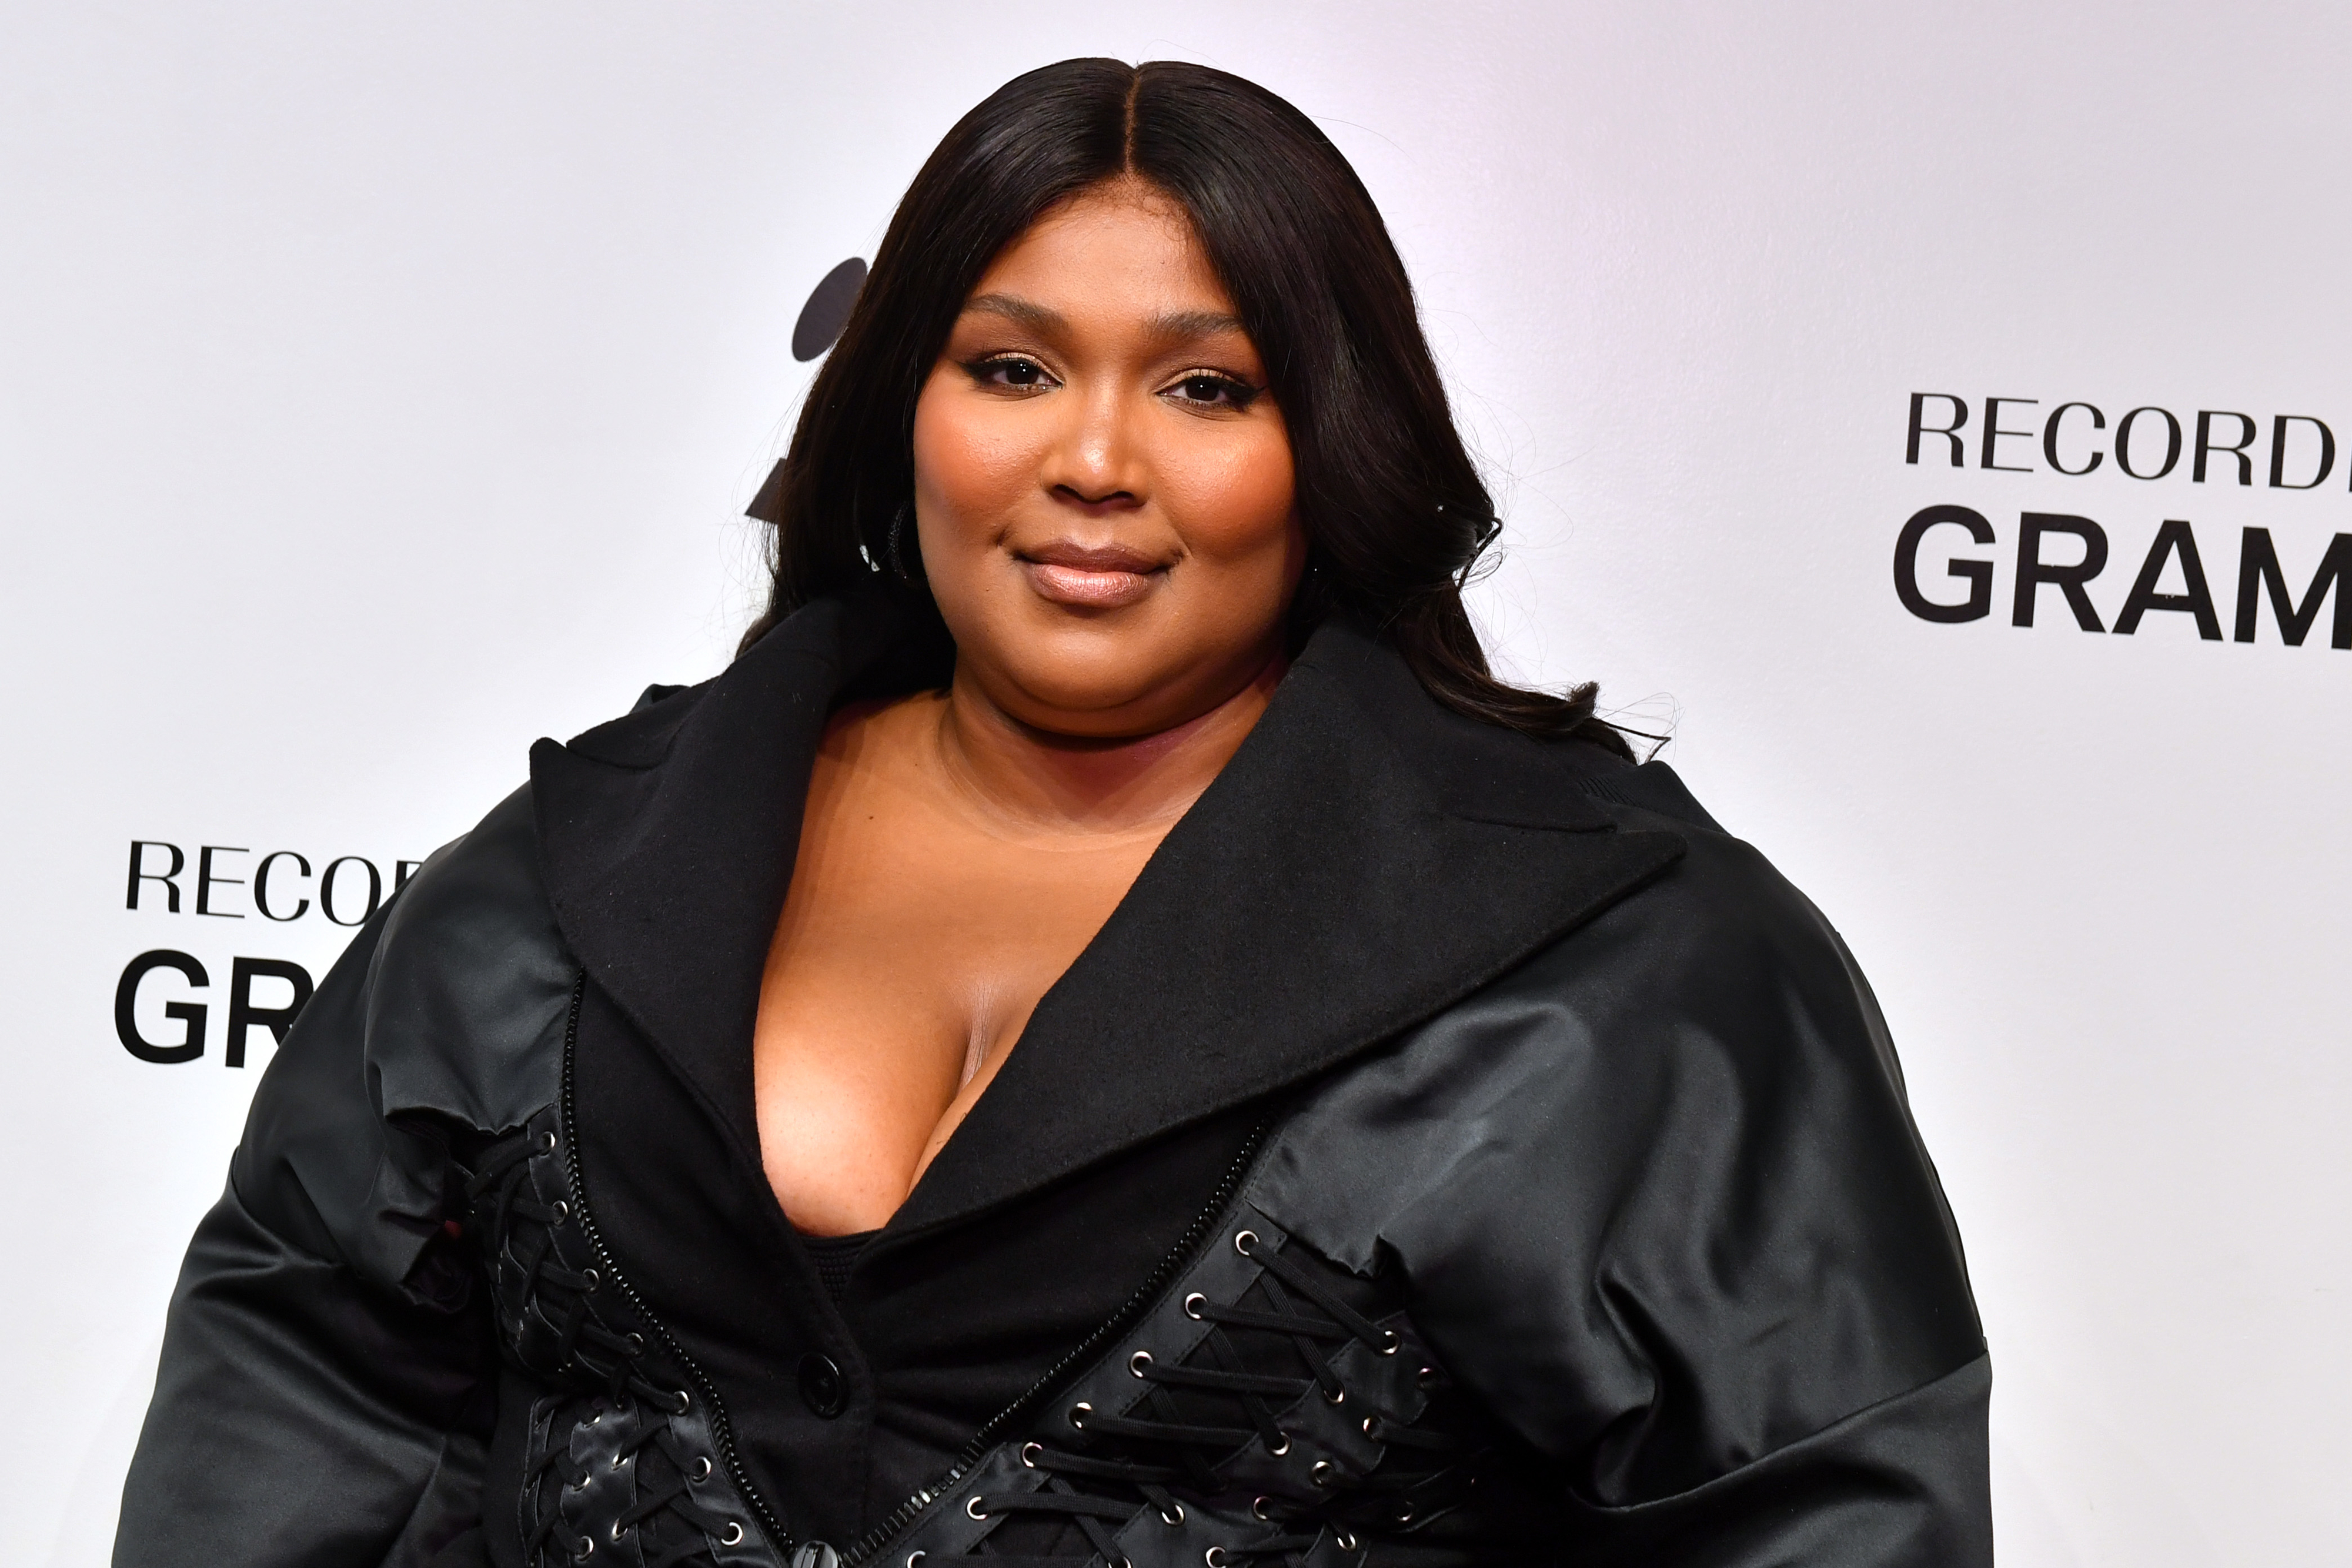 Lizzo hit with a brand new lawsuit about bullying by her touring